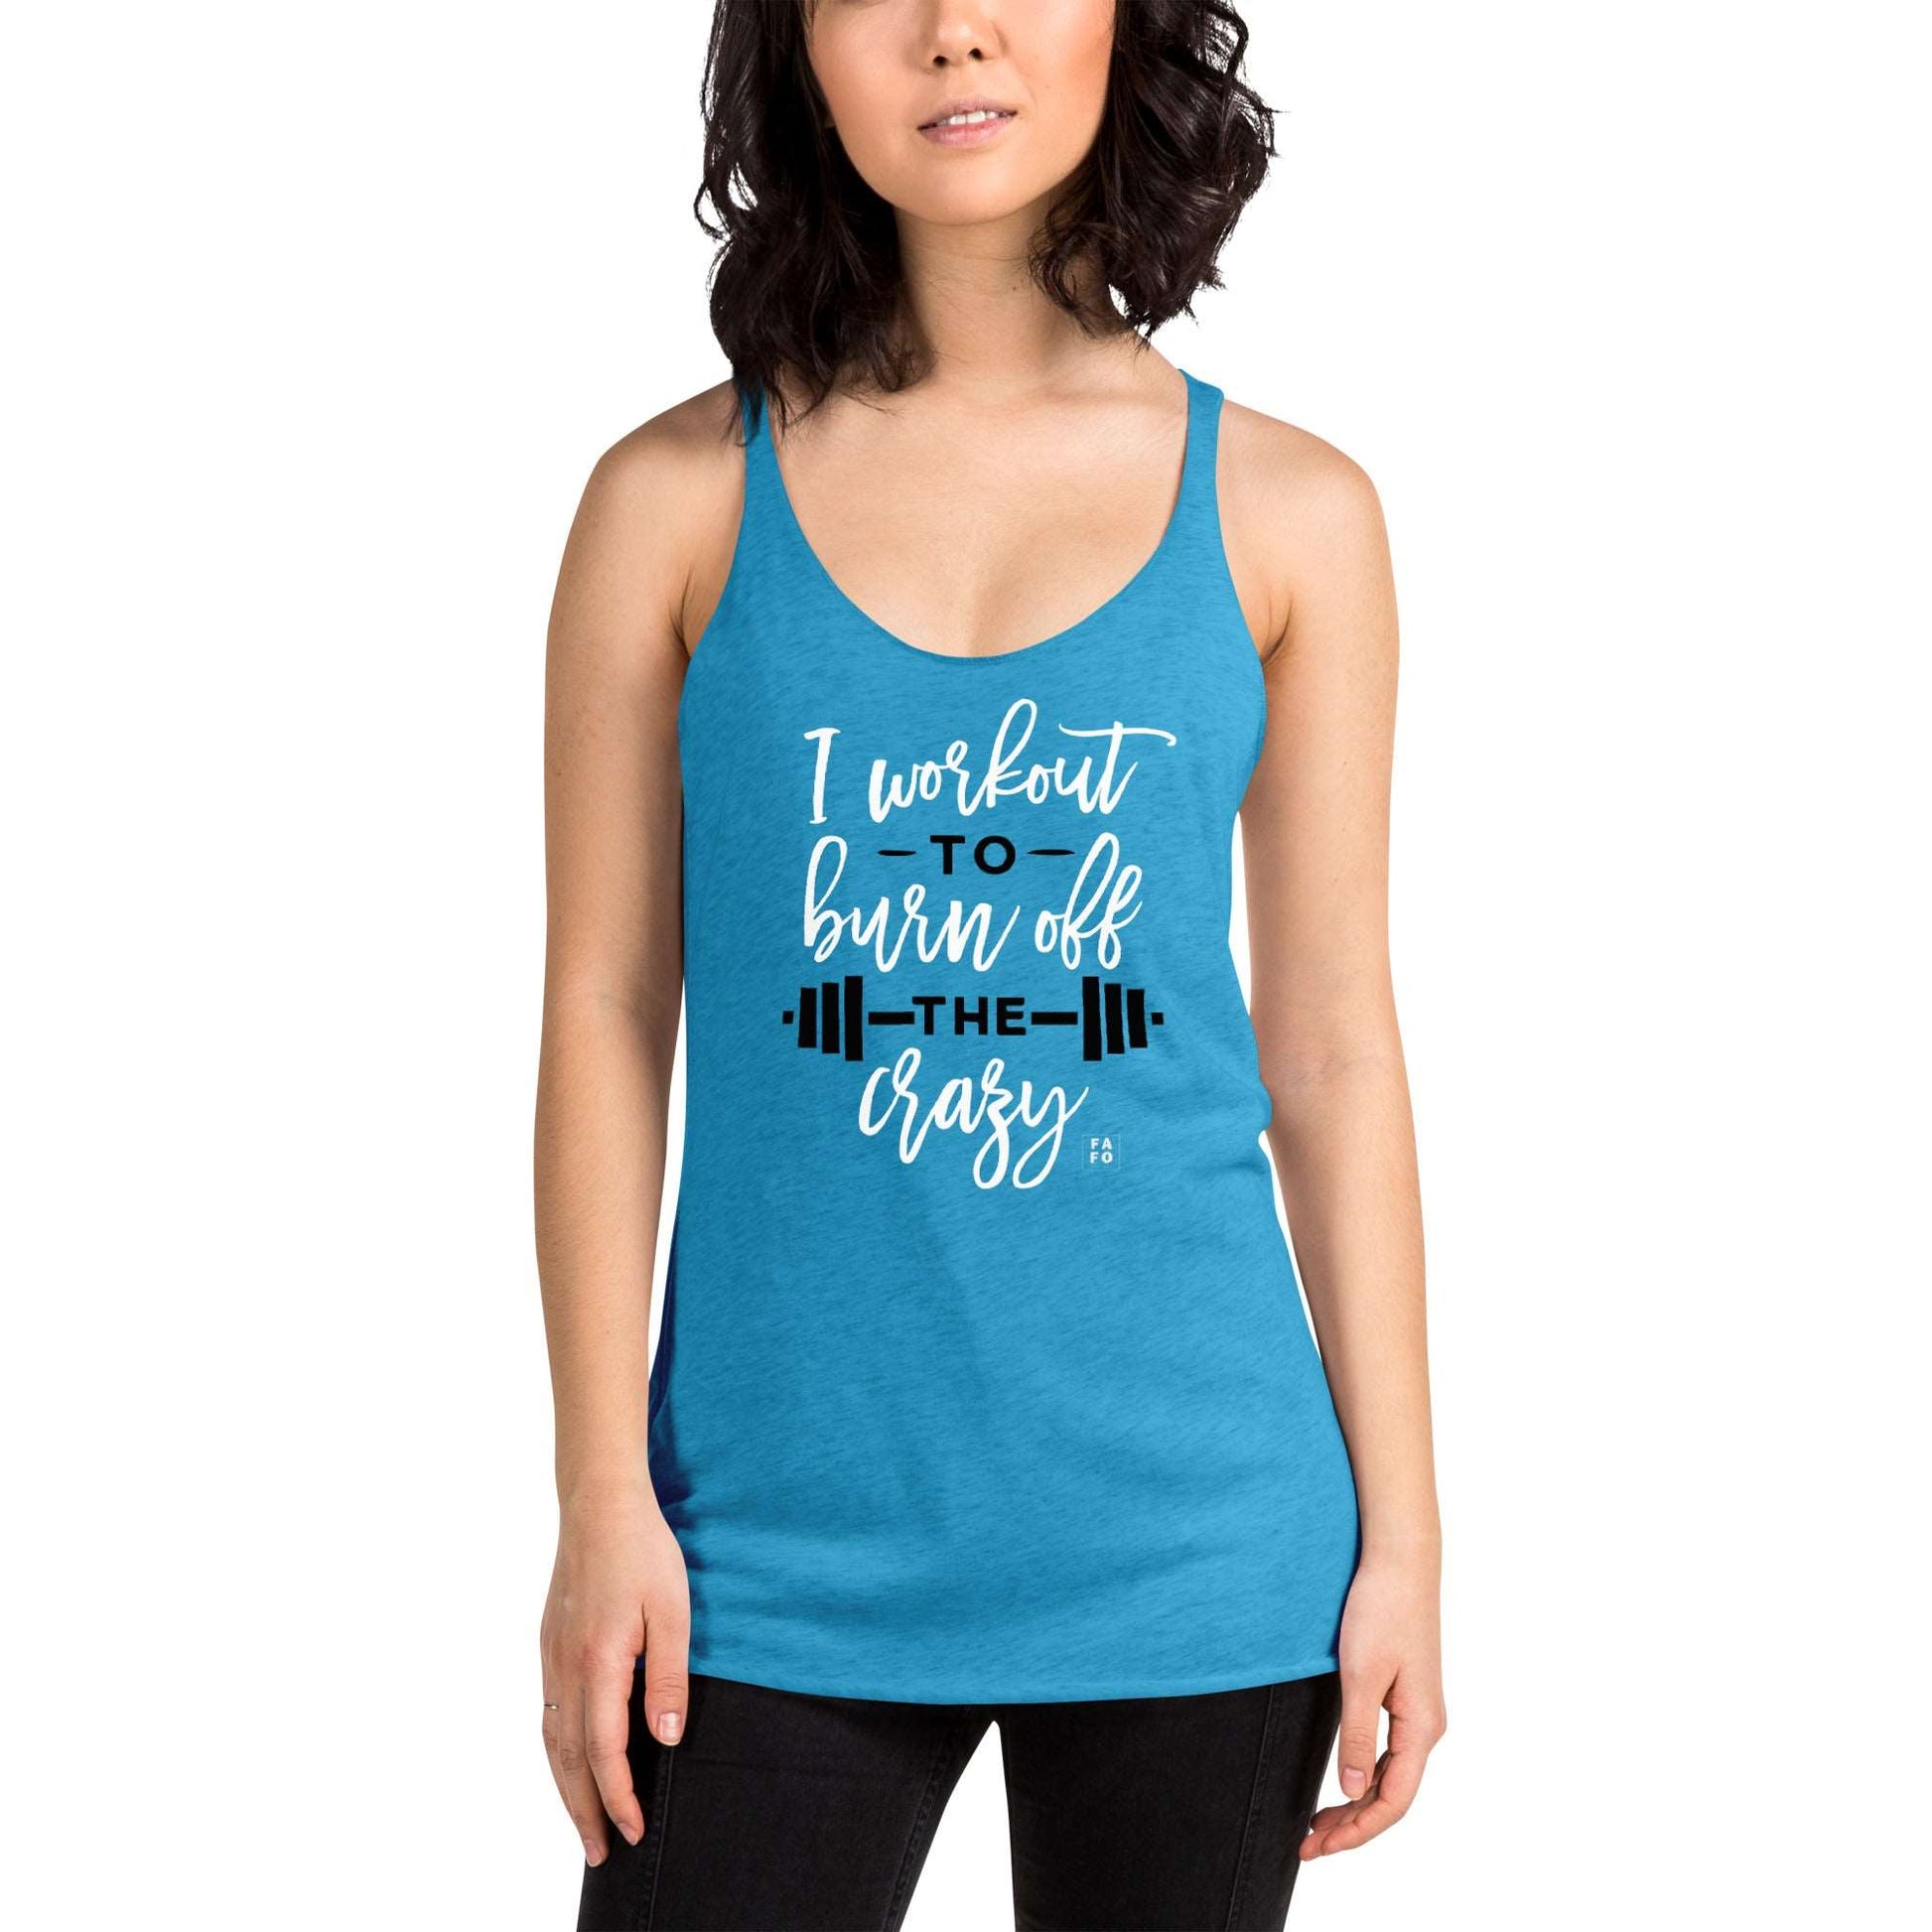 I Work Out to Burn off the Crazy Women's Racerback Tank Gym